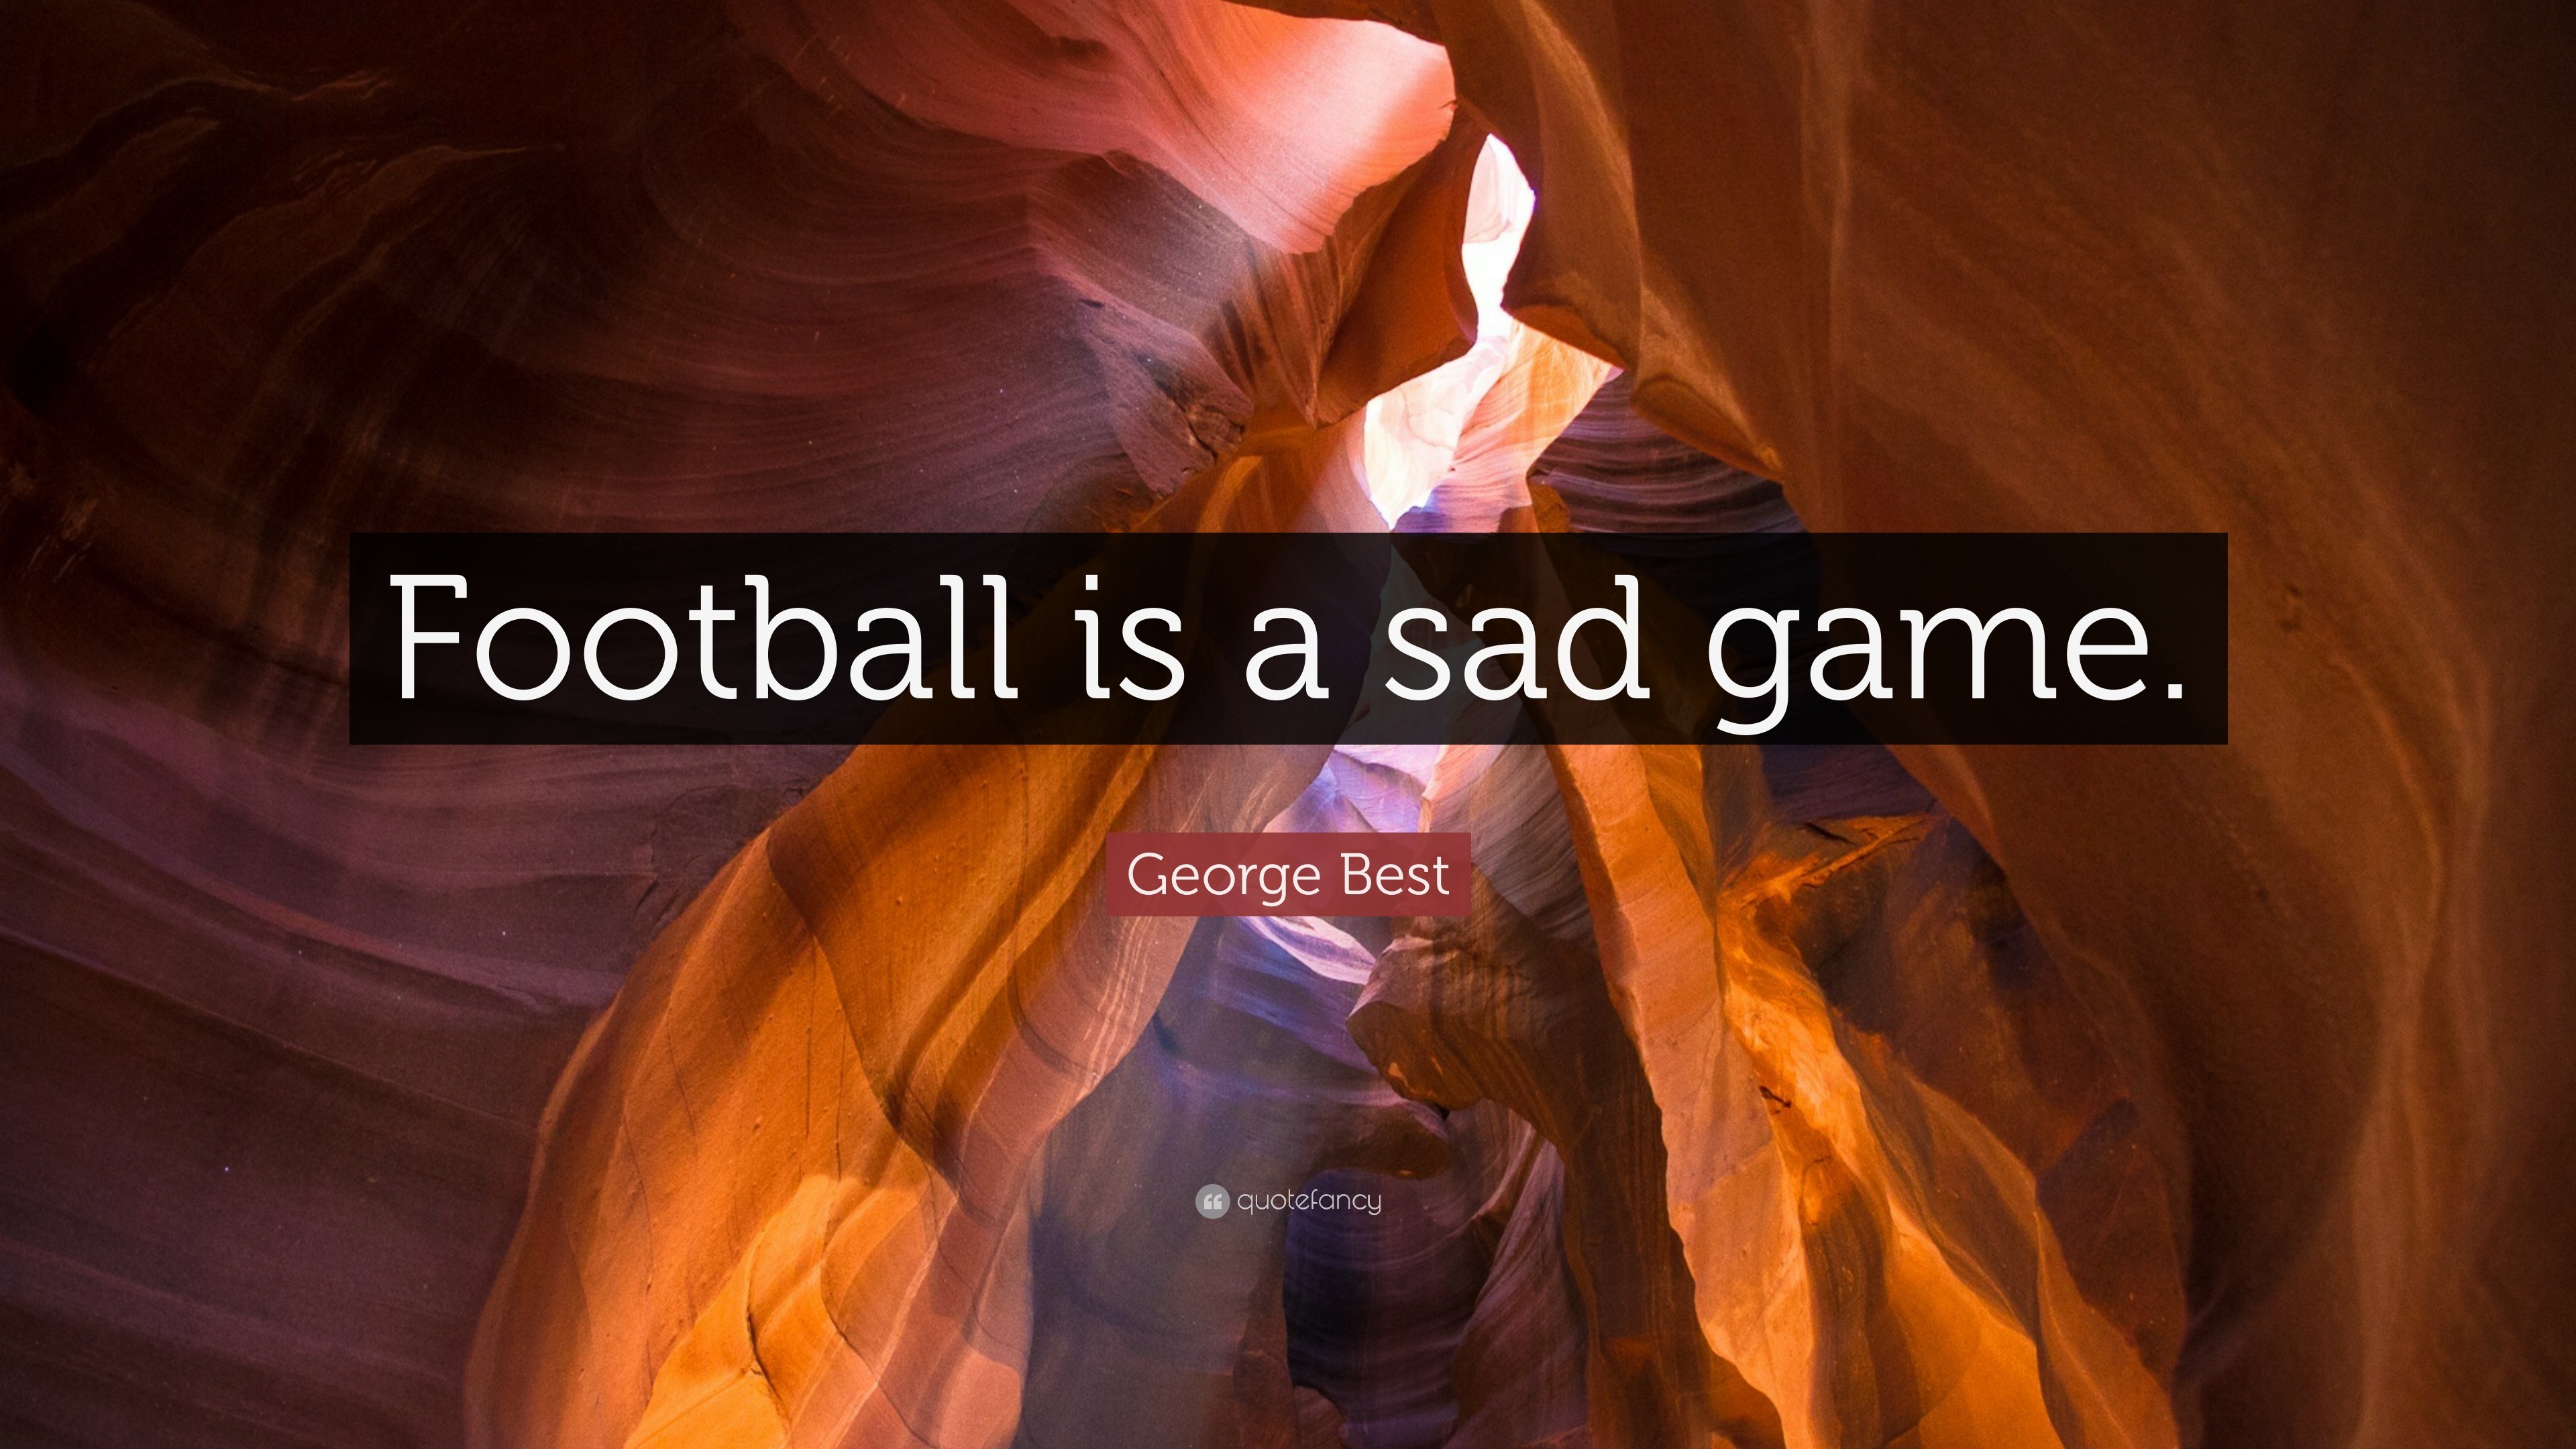 George Best Quote: “Football is a sad game.”